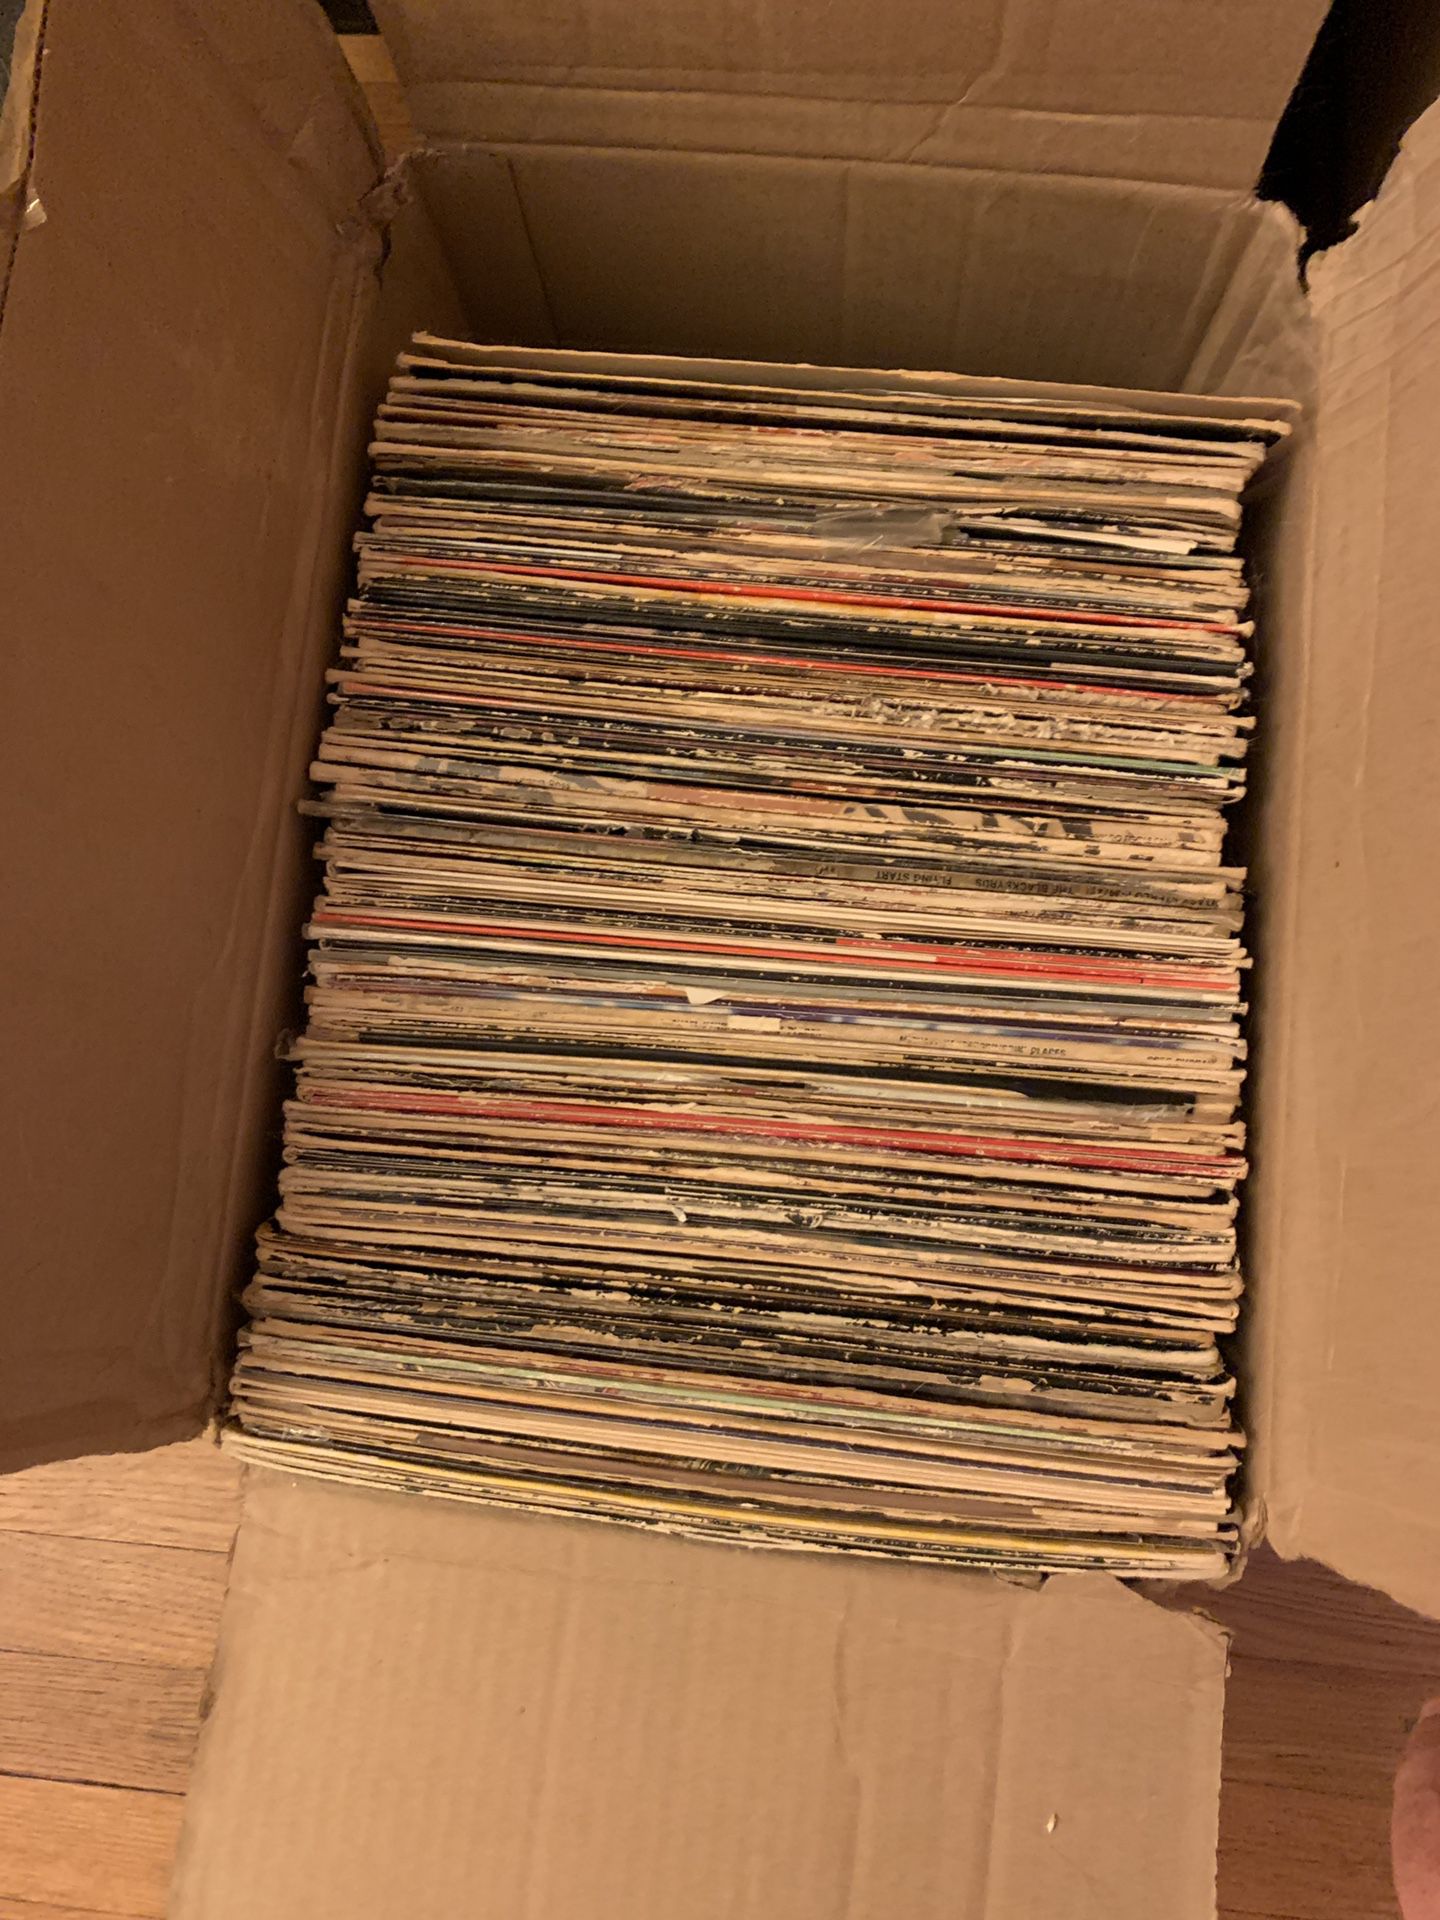 97 lp s make me an offer pictures of all lps available in request